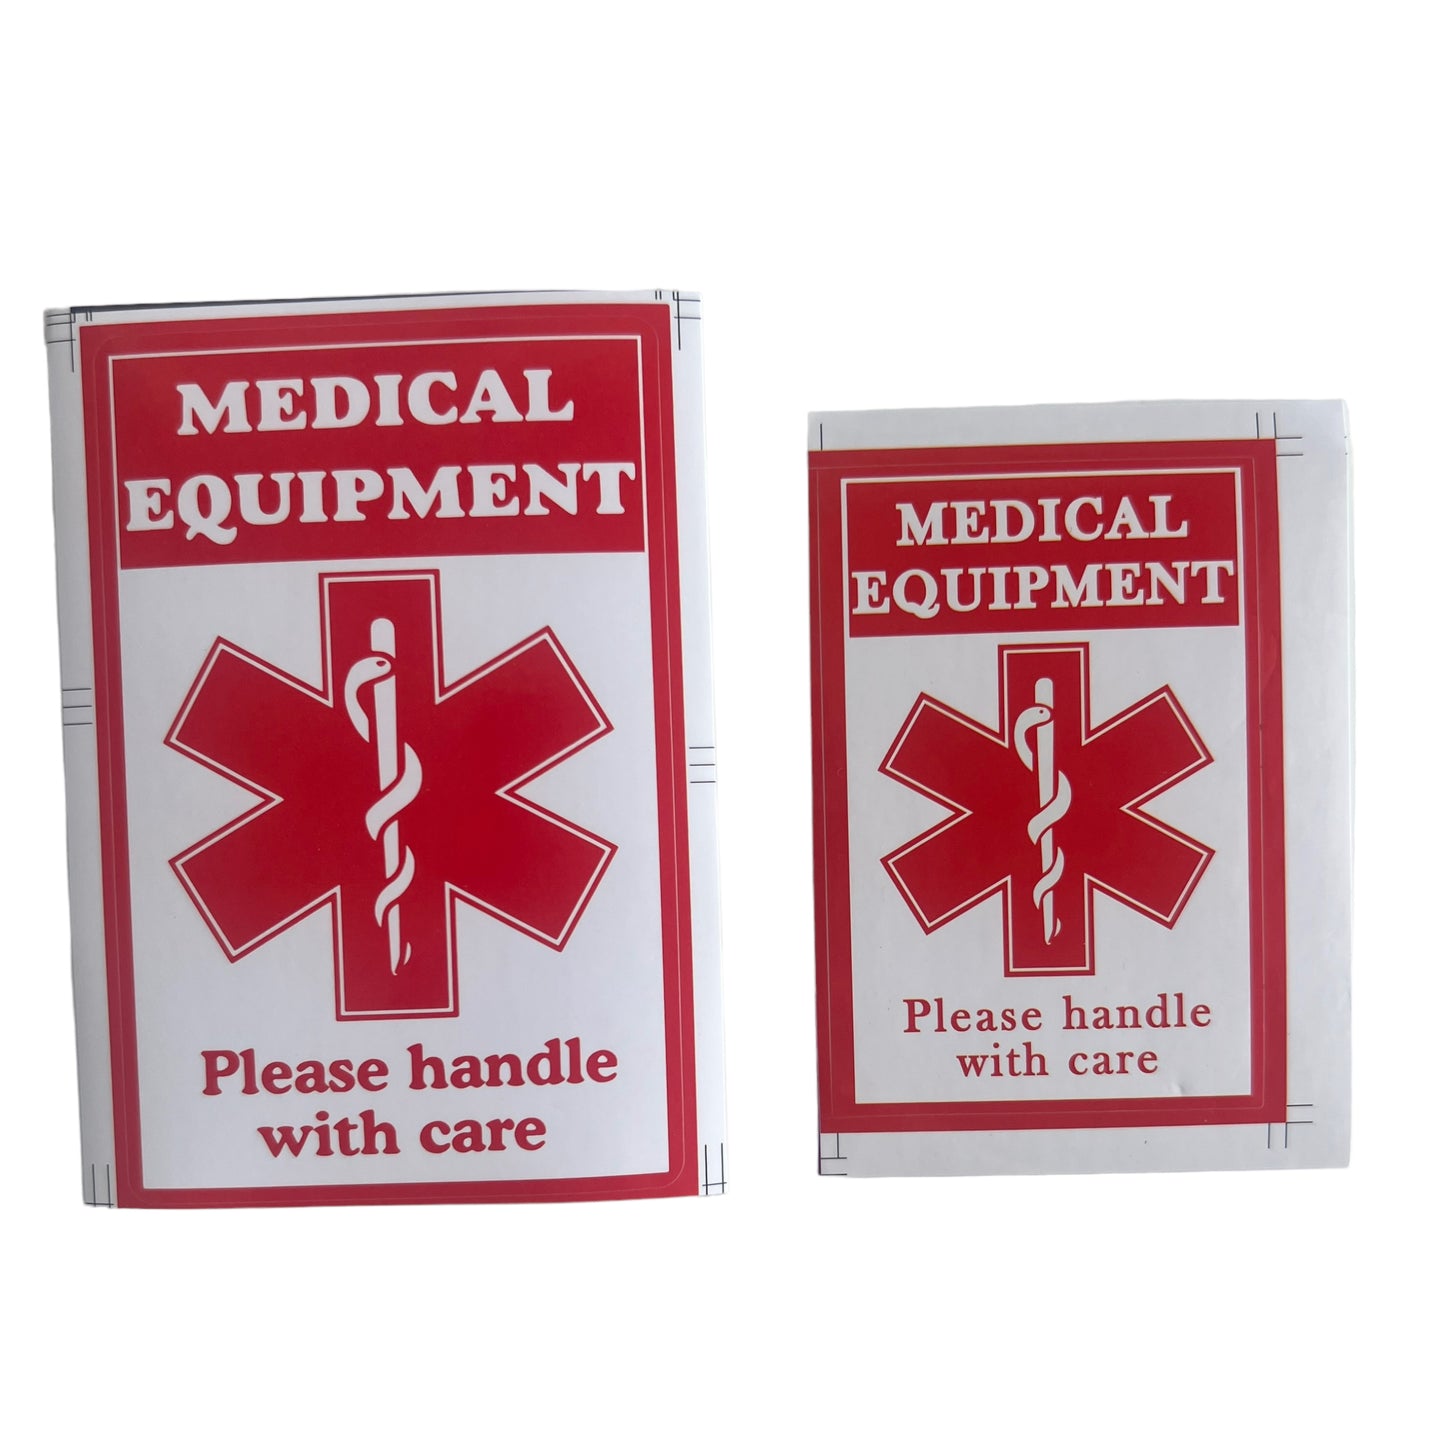 Sticker — ‘Medical Equipment. Please handle with care’